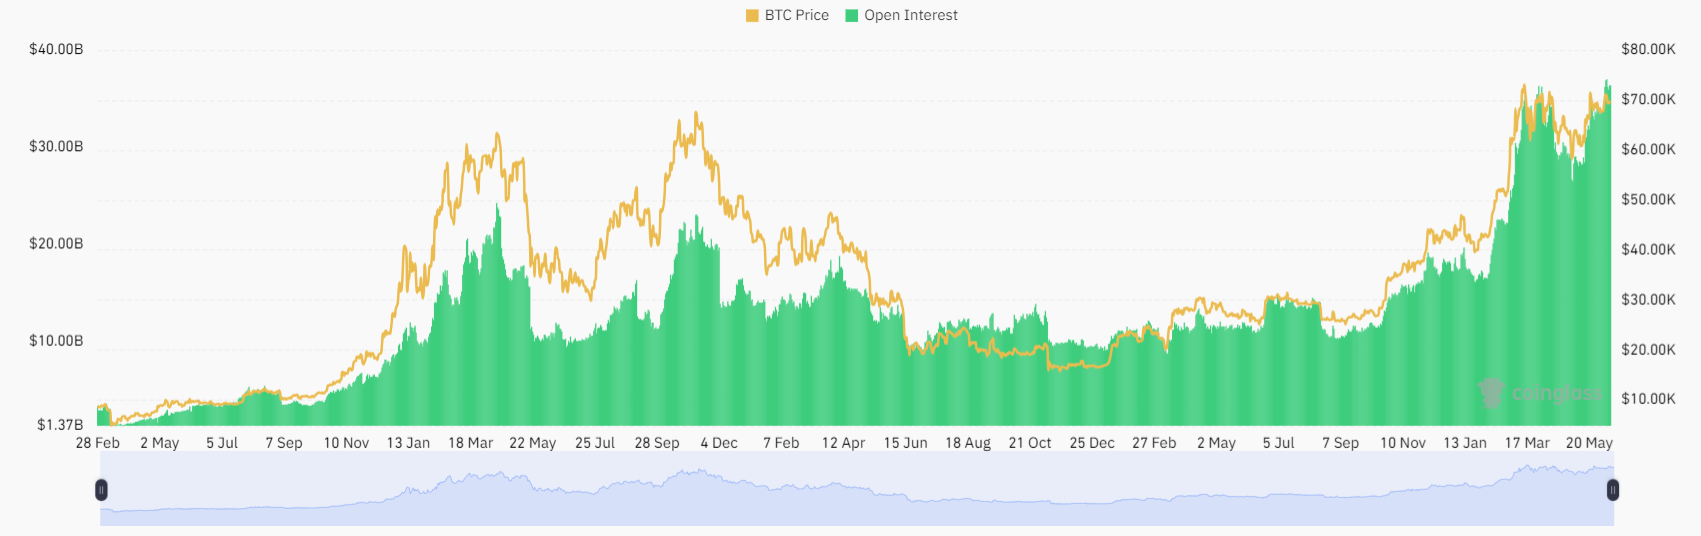 Market research report: Bitcoin at 69k as rate fears mount, overshadowing a record ETF inflow streak - openinterest